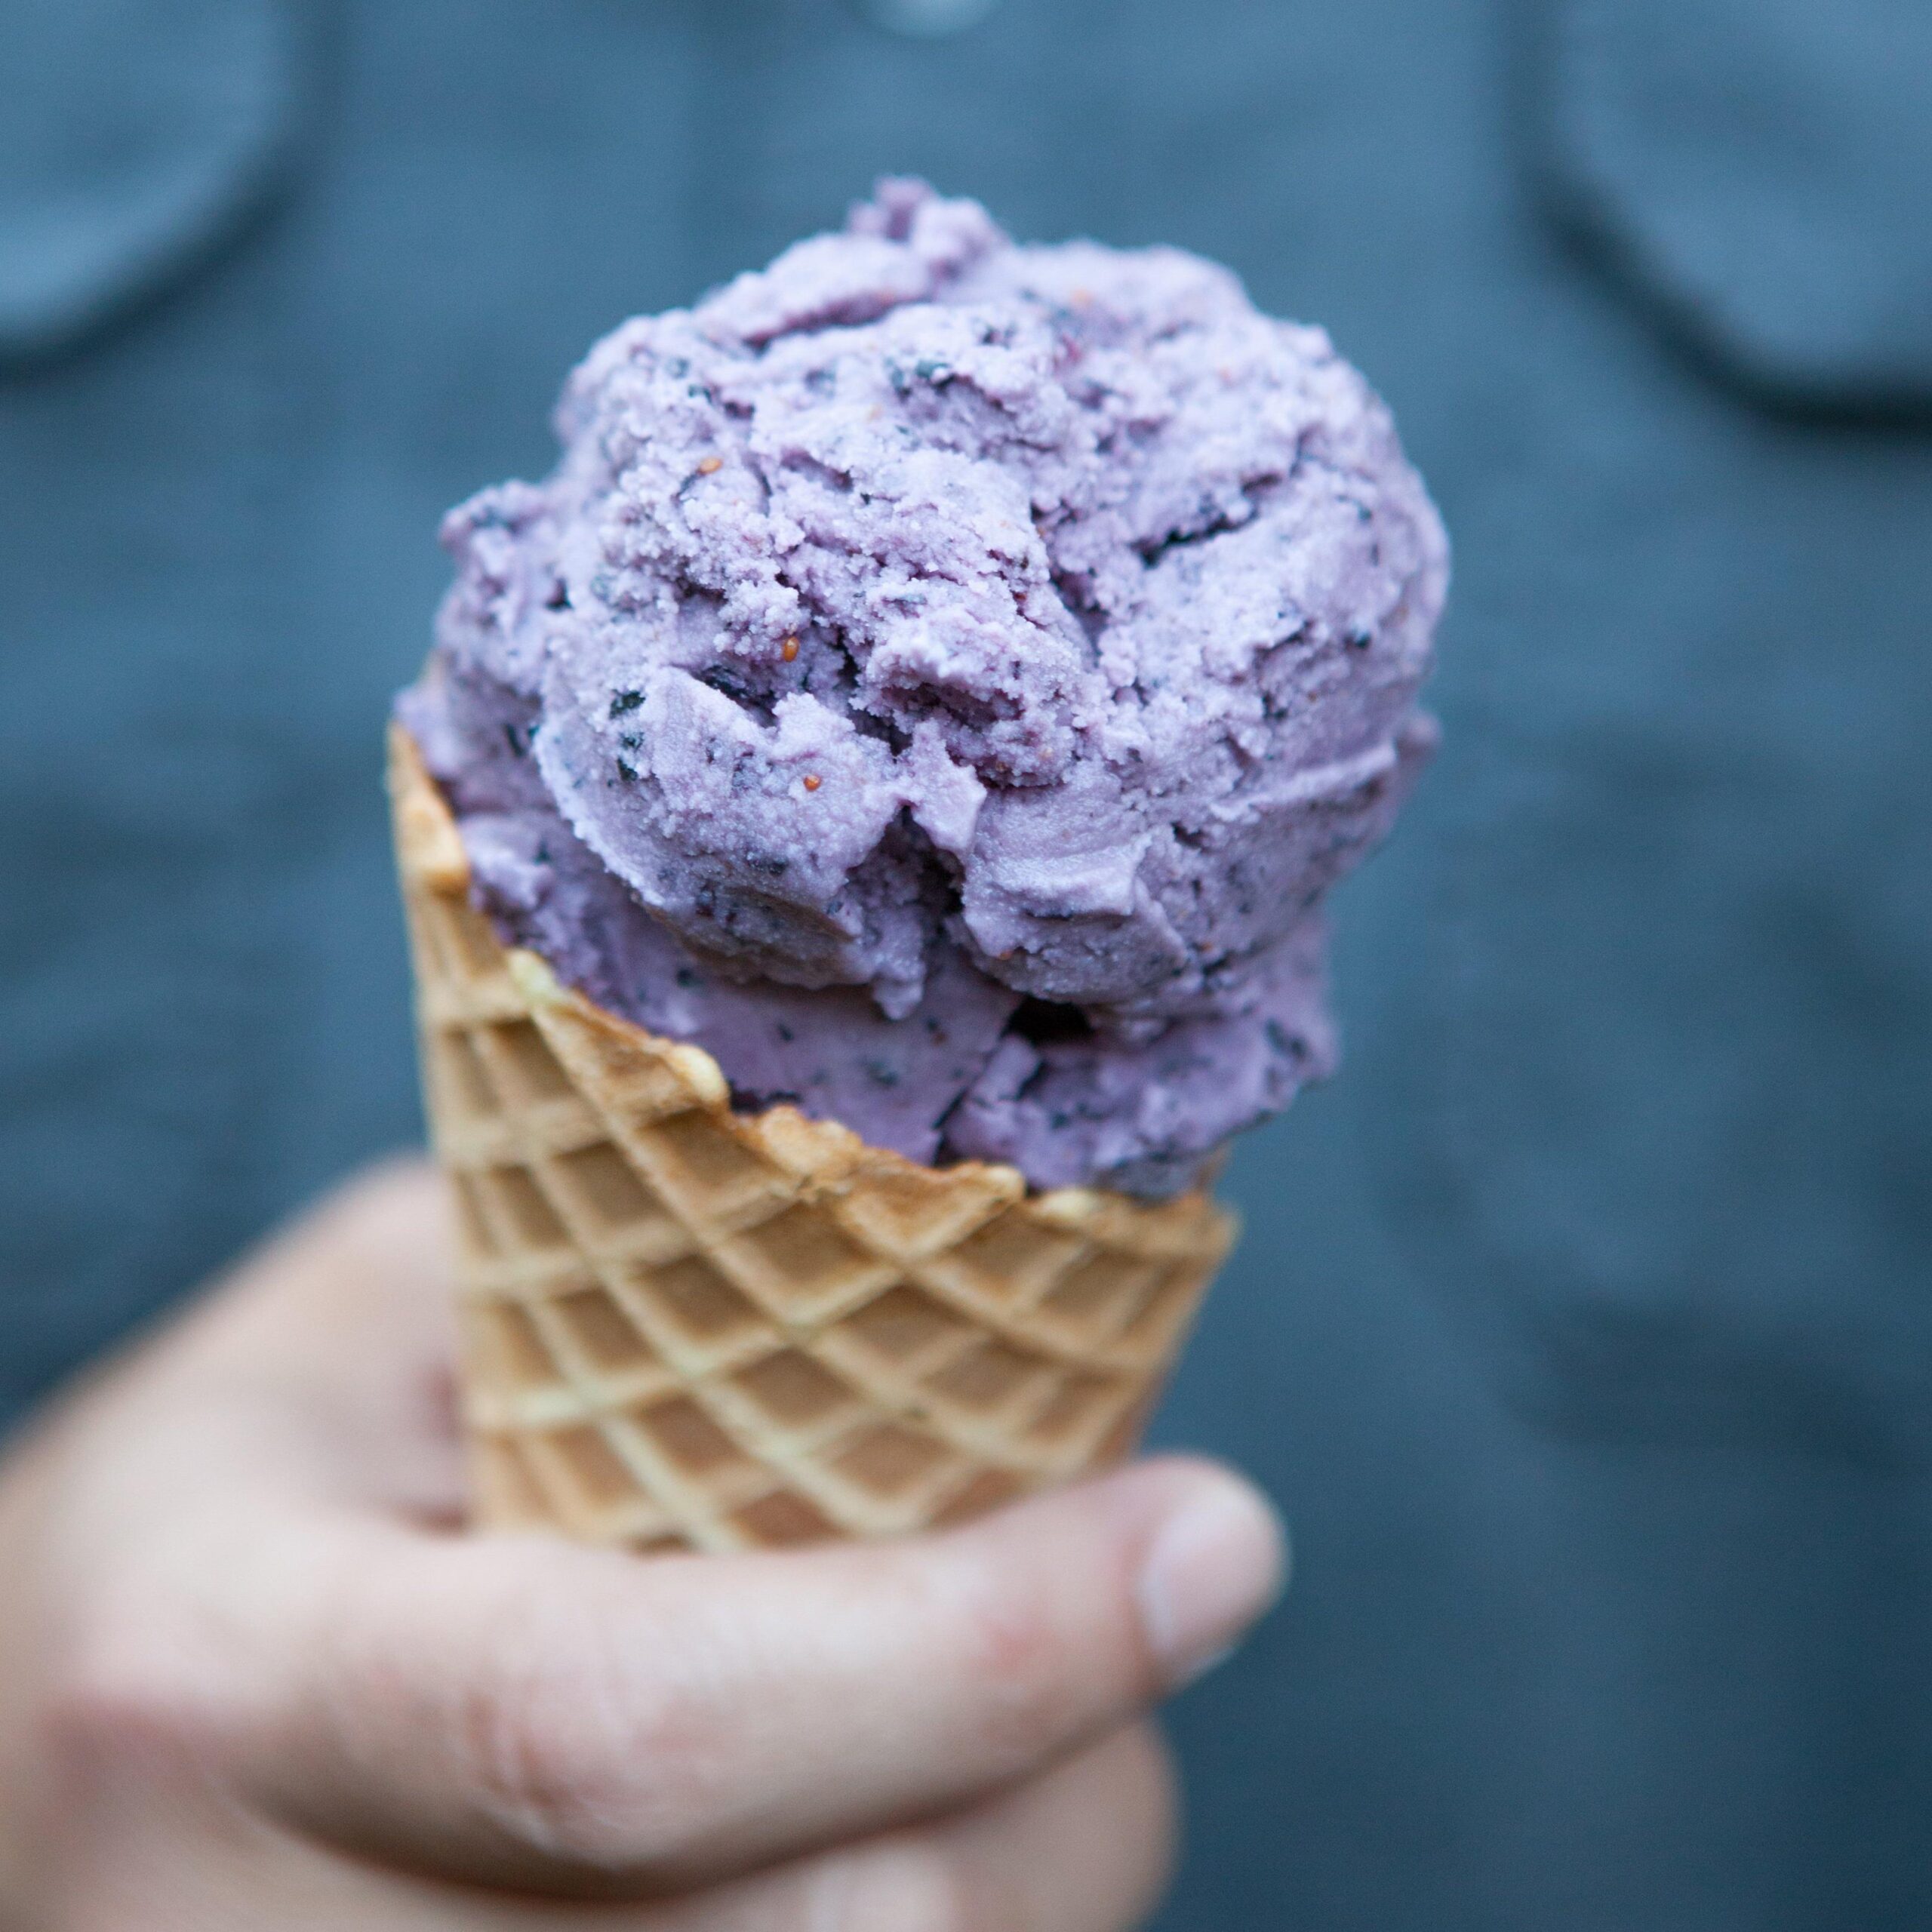  Holy cow, this dairy-free blueberry ice cream is out-of-this-world delicious!